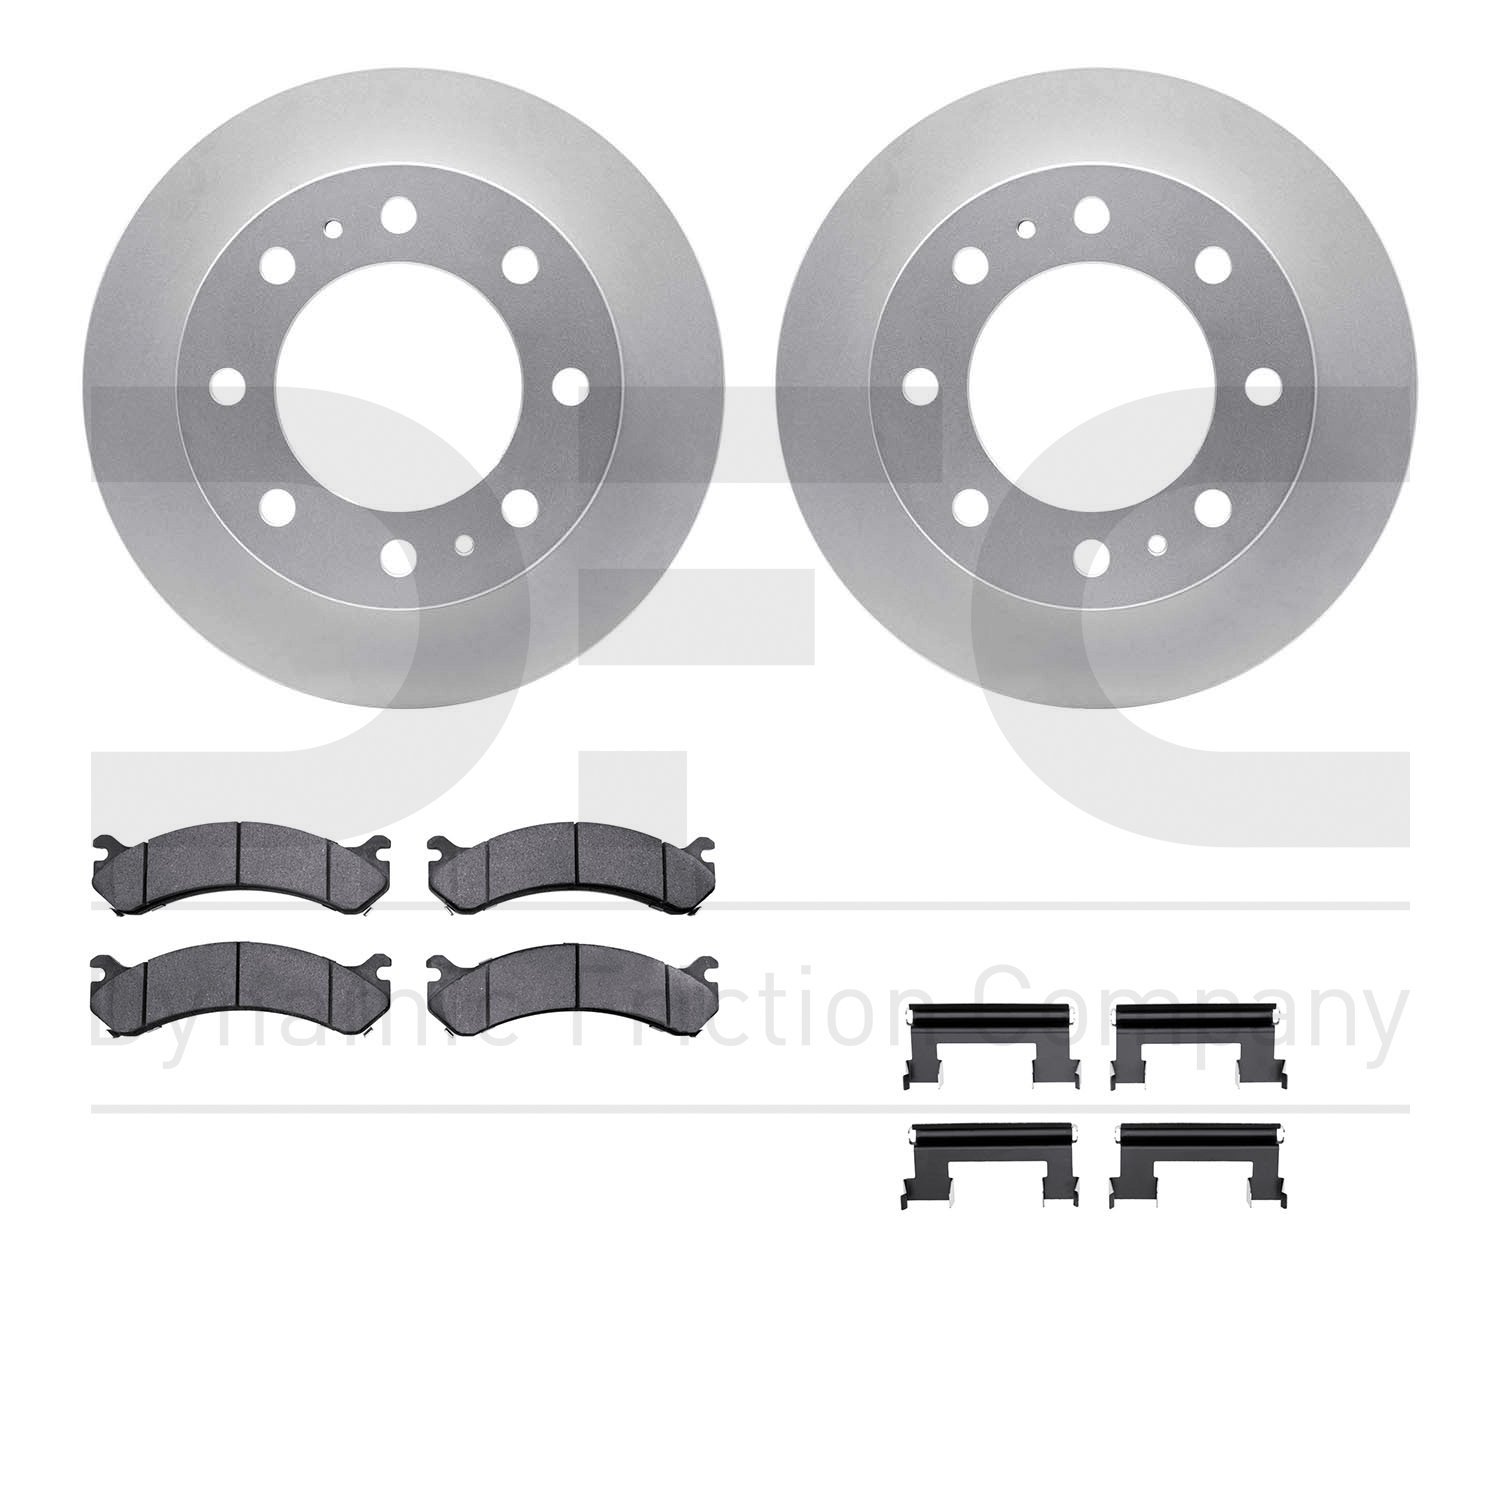 4412-48015 Geospec Brake Rotors with Ultimate-Duty Brake Pads & Hardware, 1999-2020 GM, Position: Front